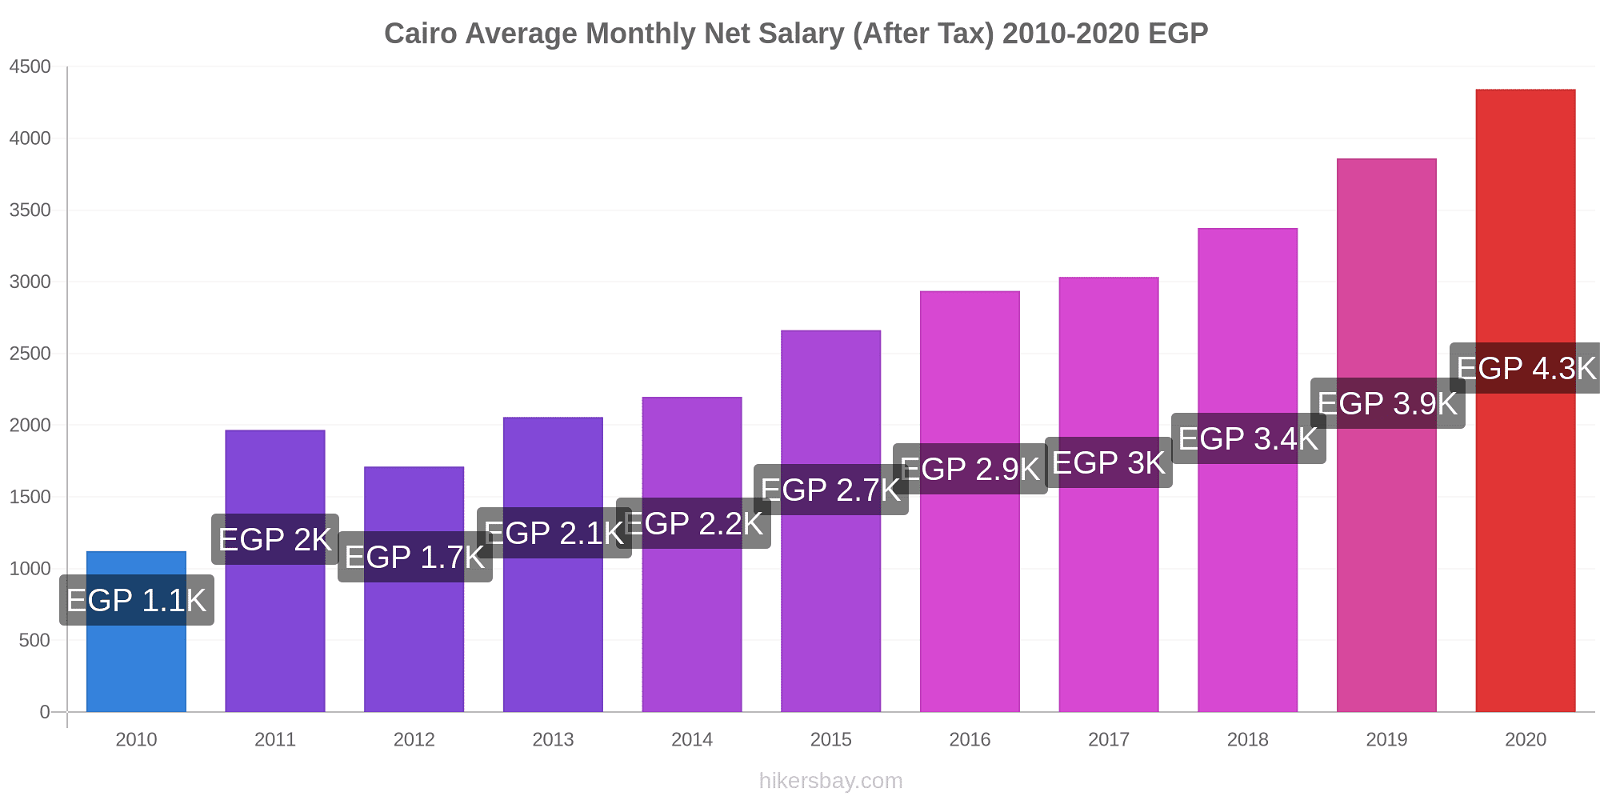 Cairo price changes Average Monthly Net Salary (After Tax) hikersbay.com